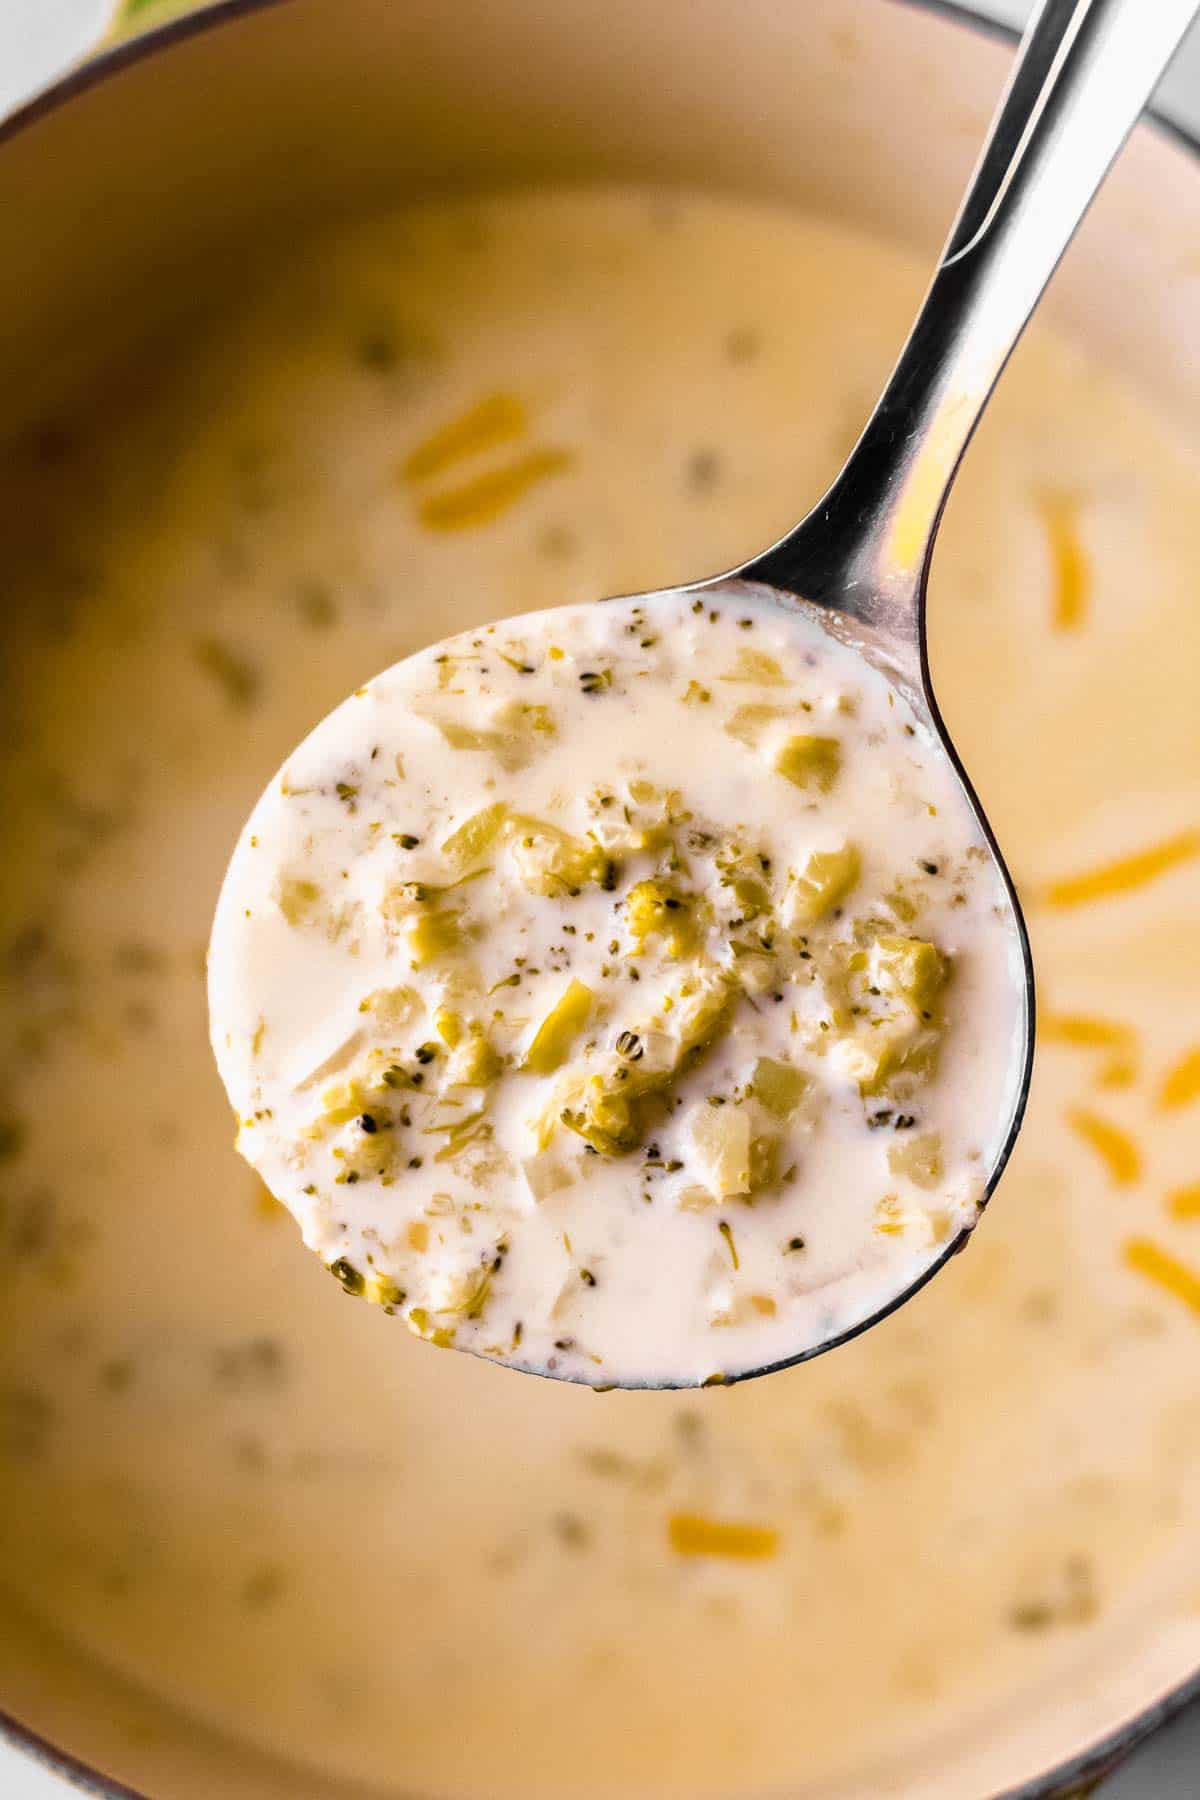 A close up of a ladle full of Keto Broccoli Cheese Soup